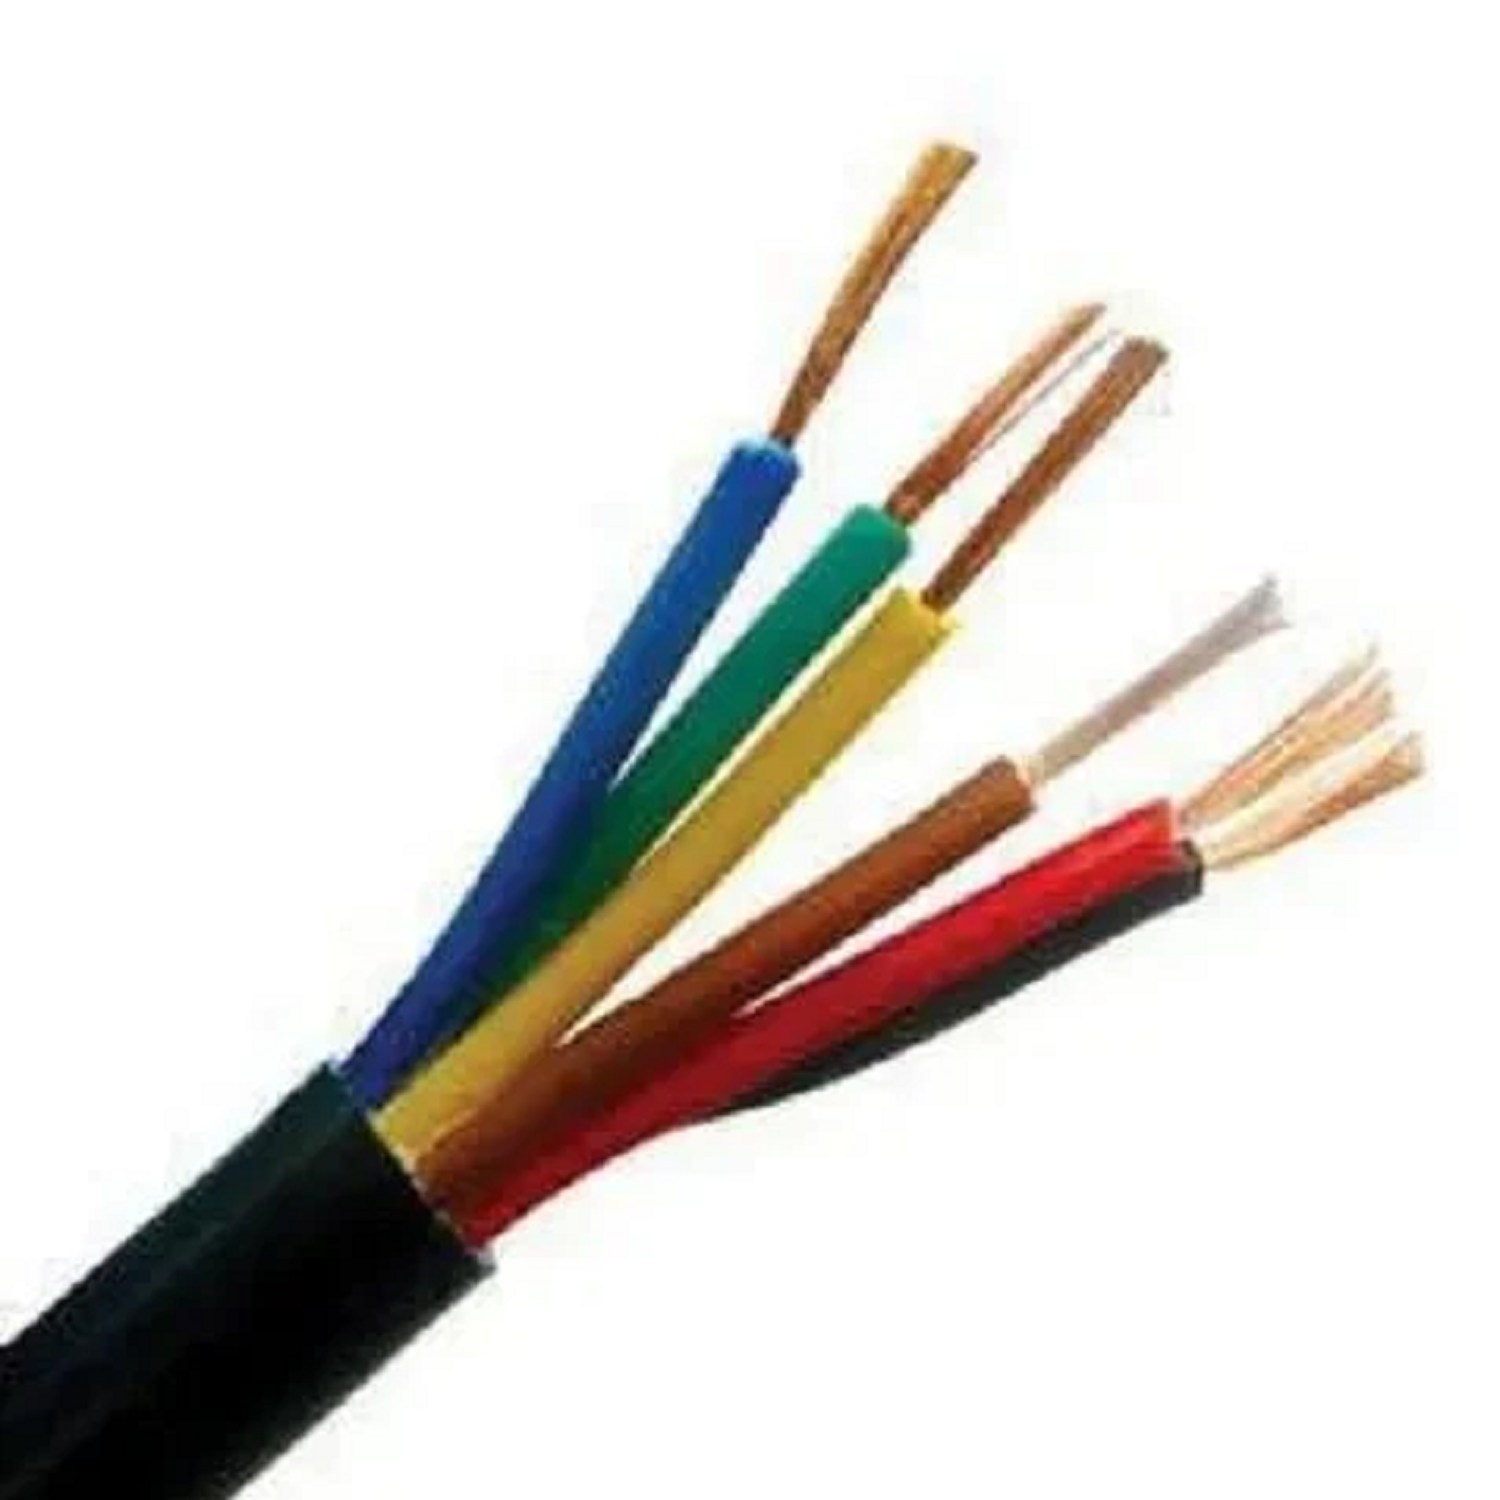 25 Sqmm Finolex Copper Flexible Cable With PVC Insulated For Domestic 38 Industrial Uses